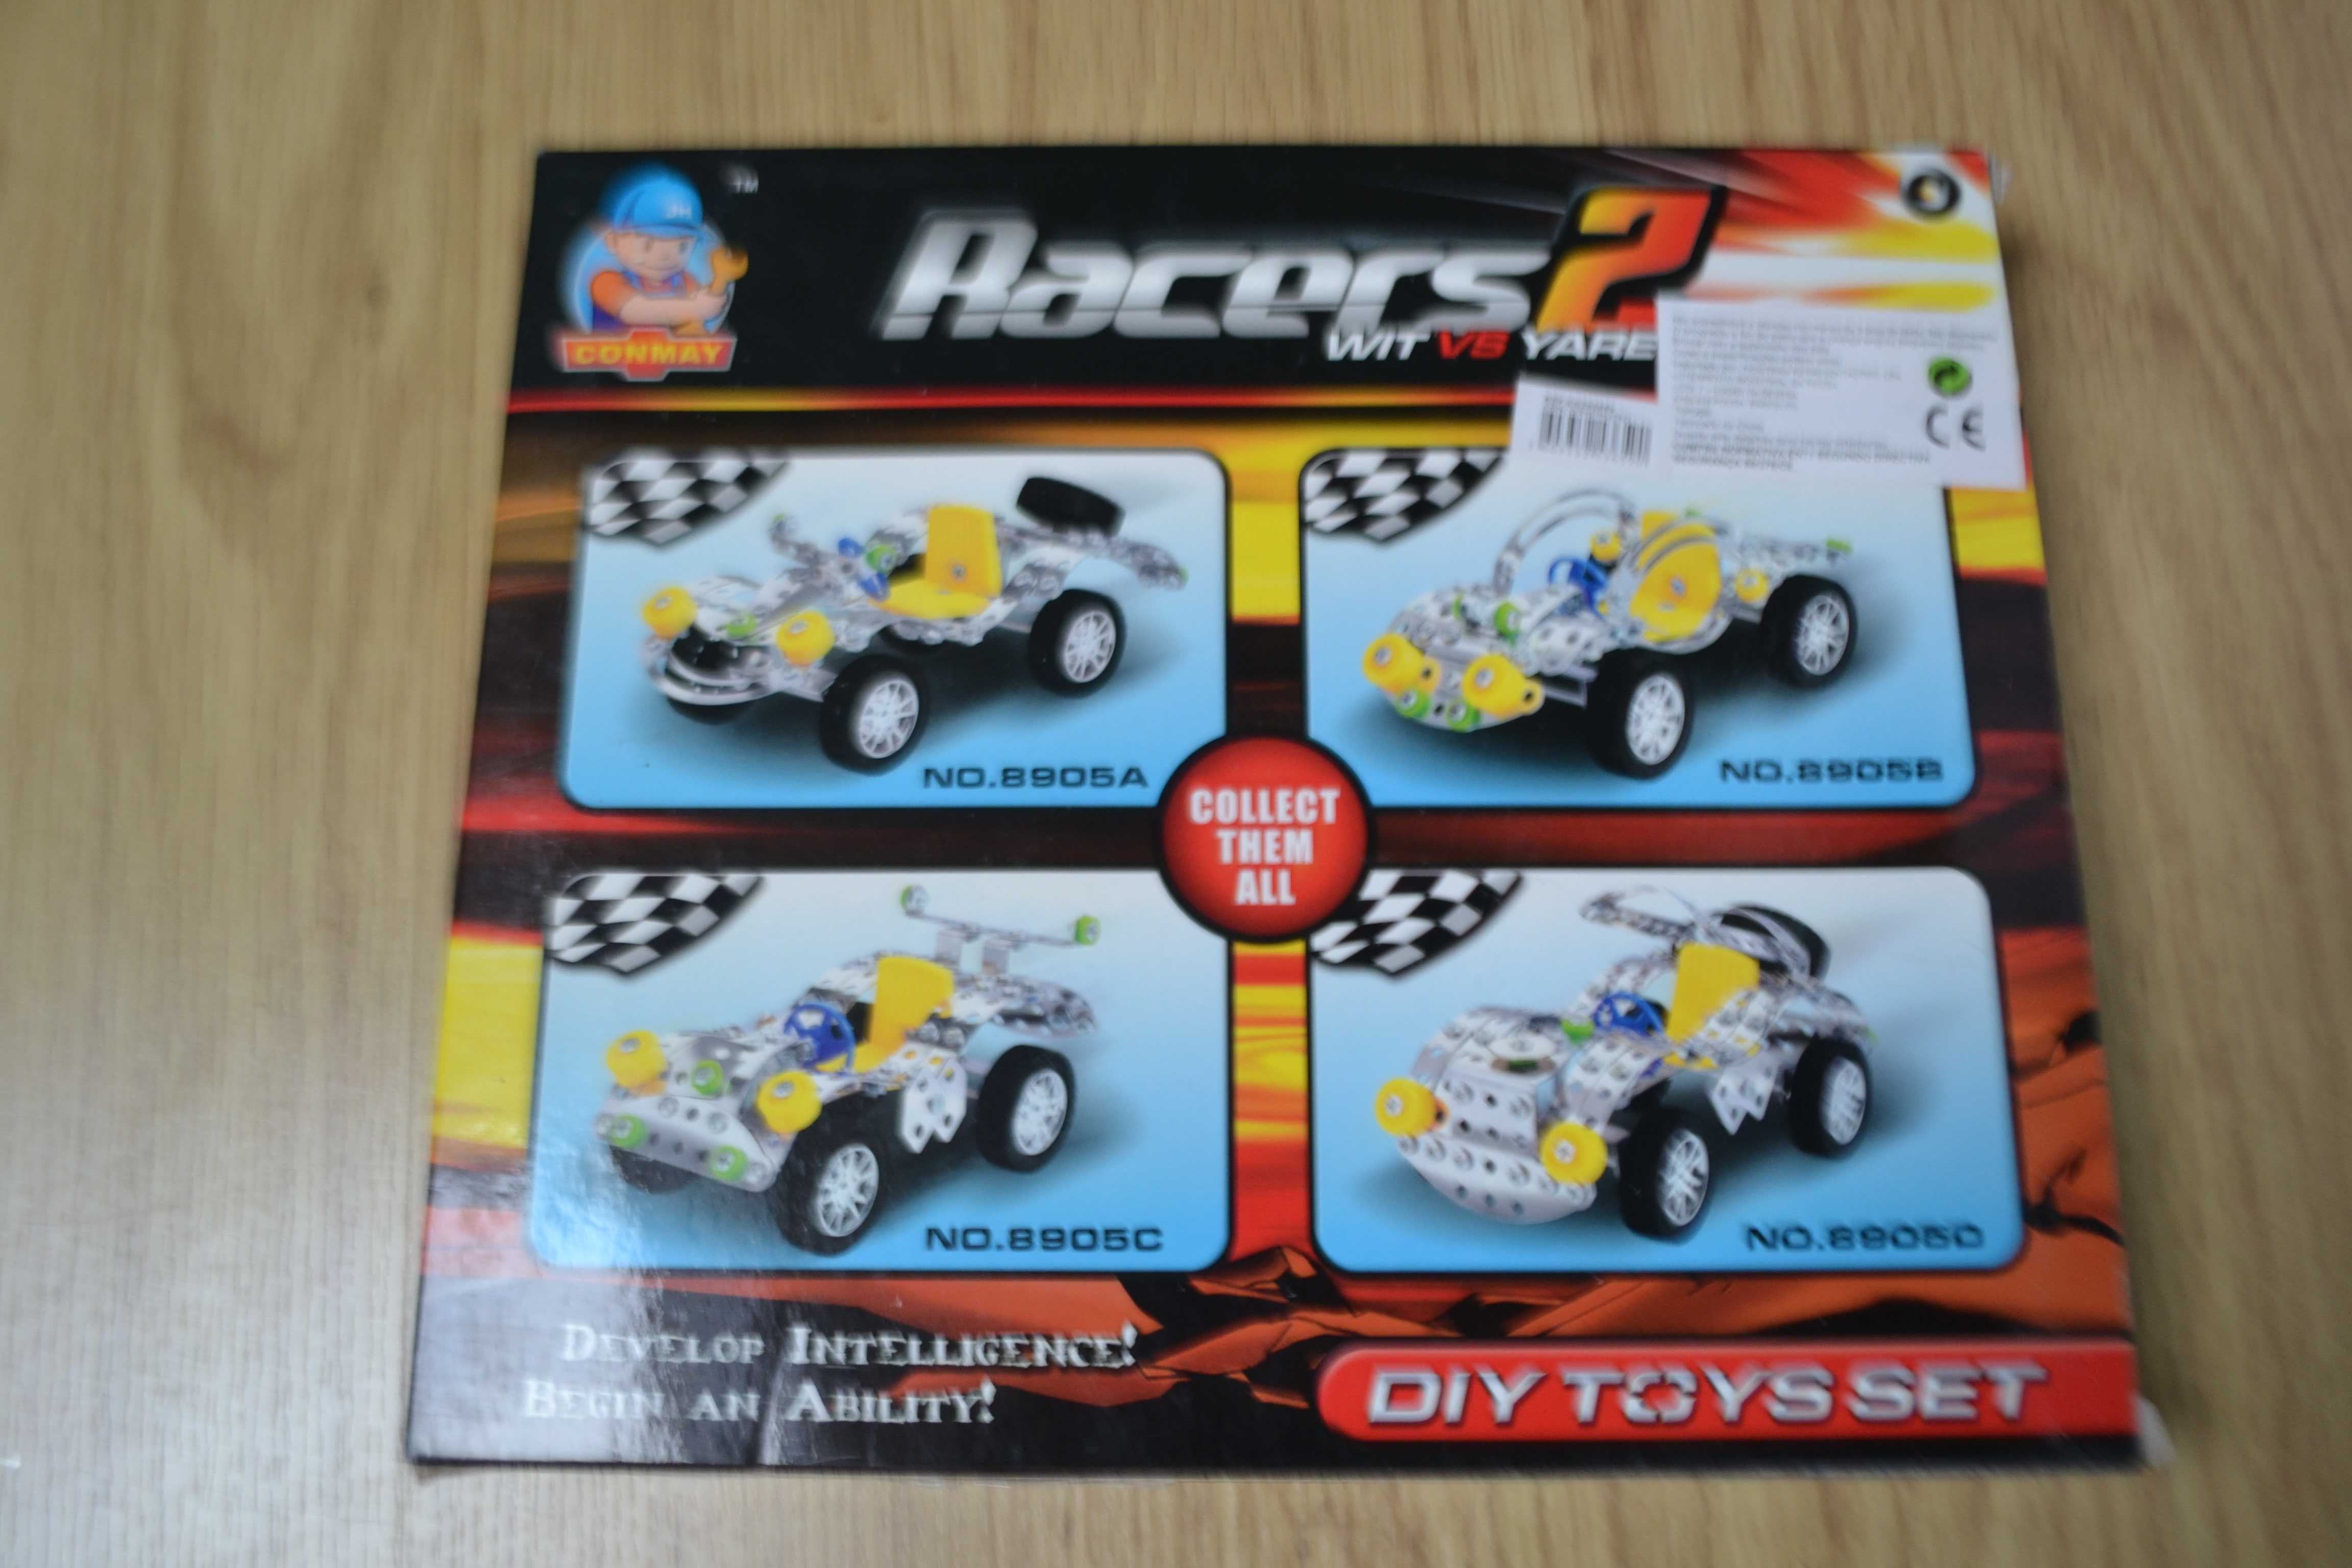 Racers 2 Wit vs Yare - da Conmay - DIY Toy Set